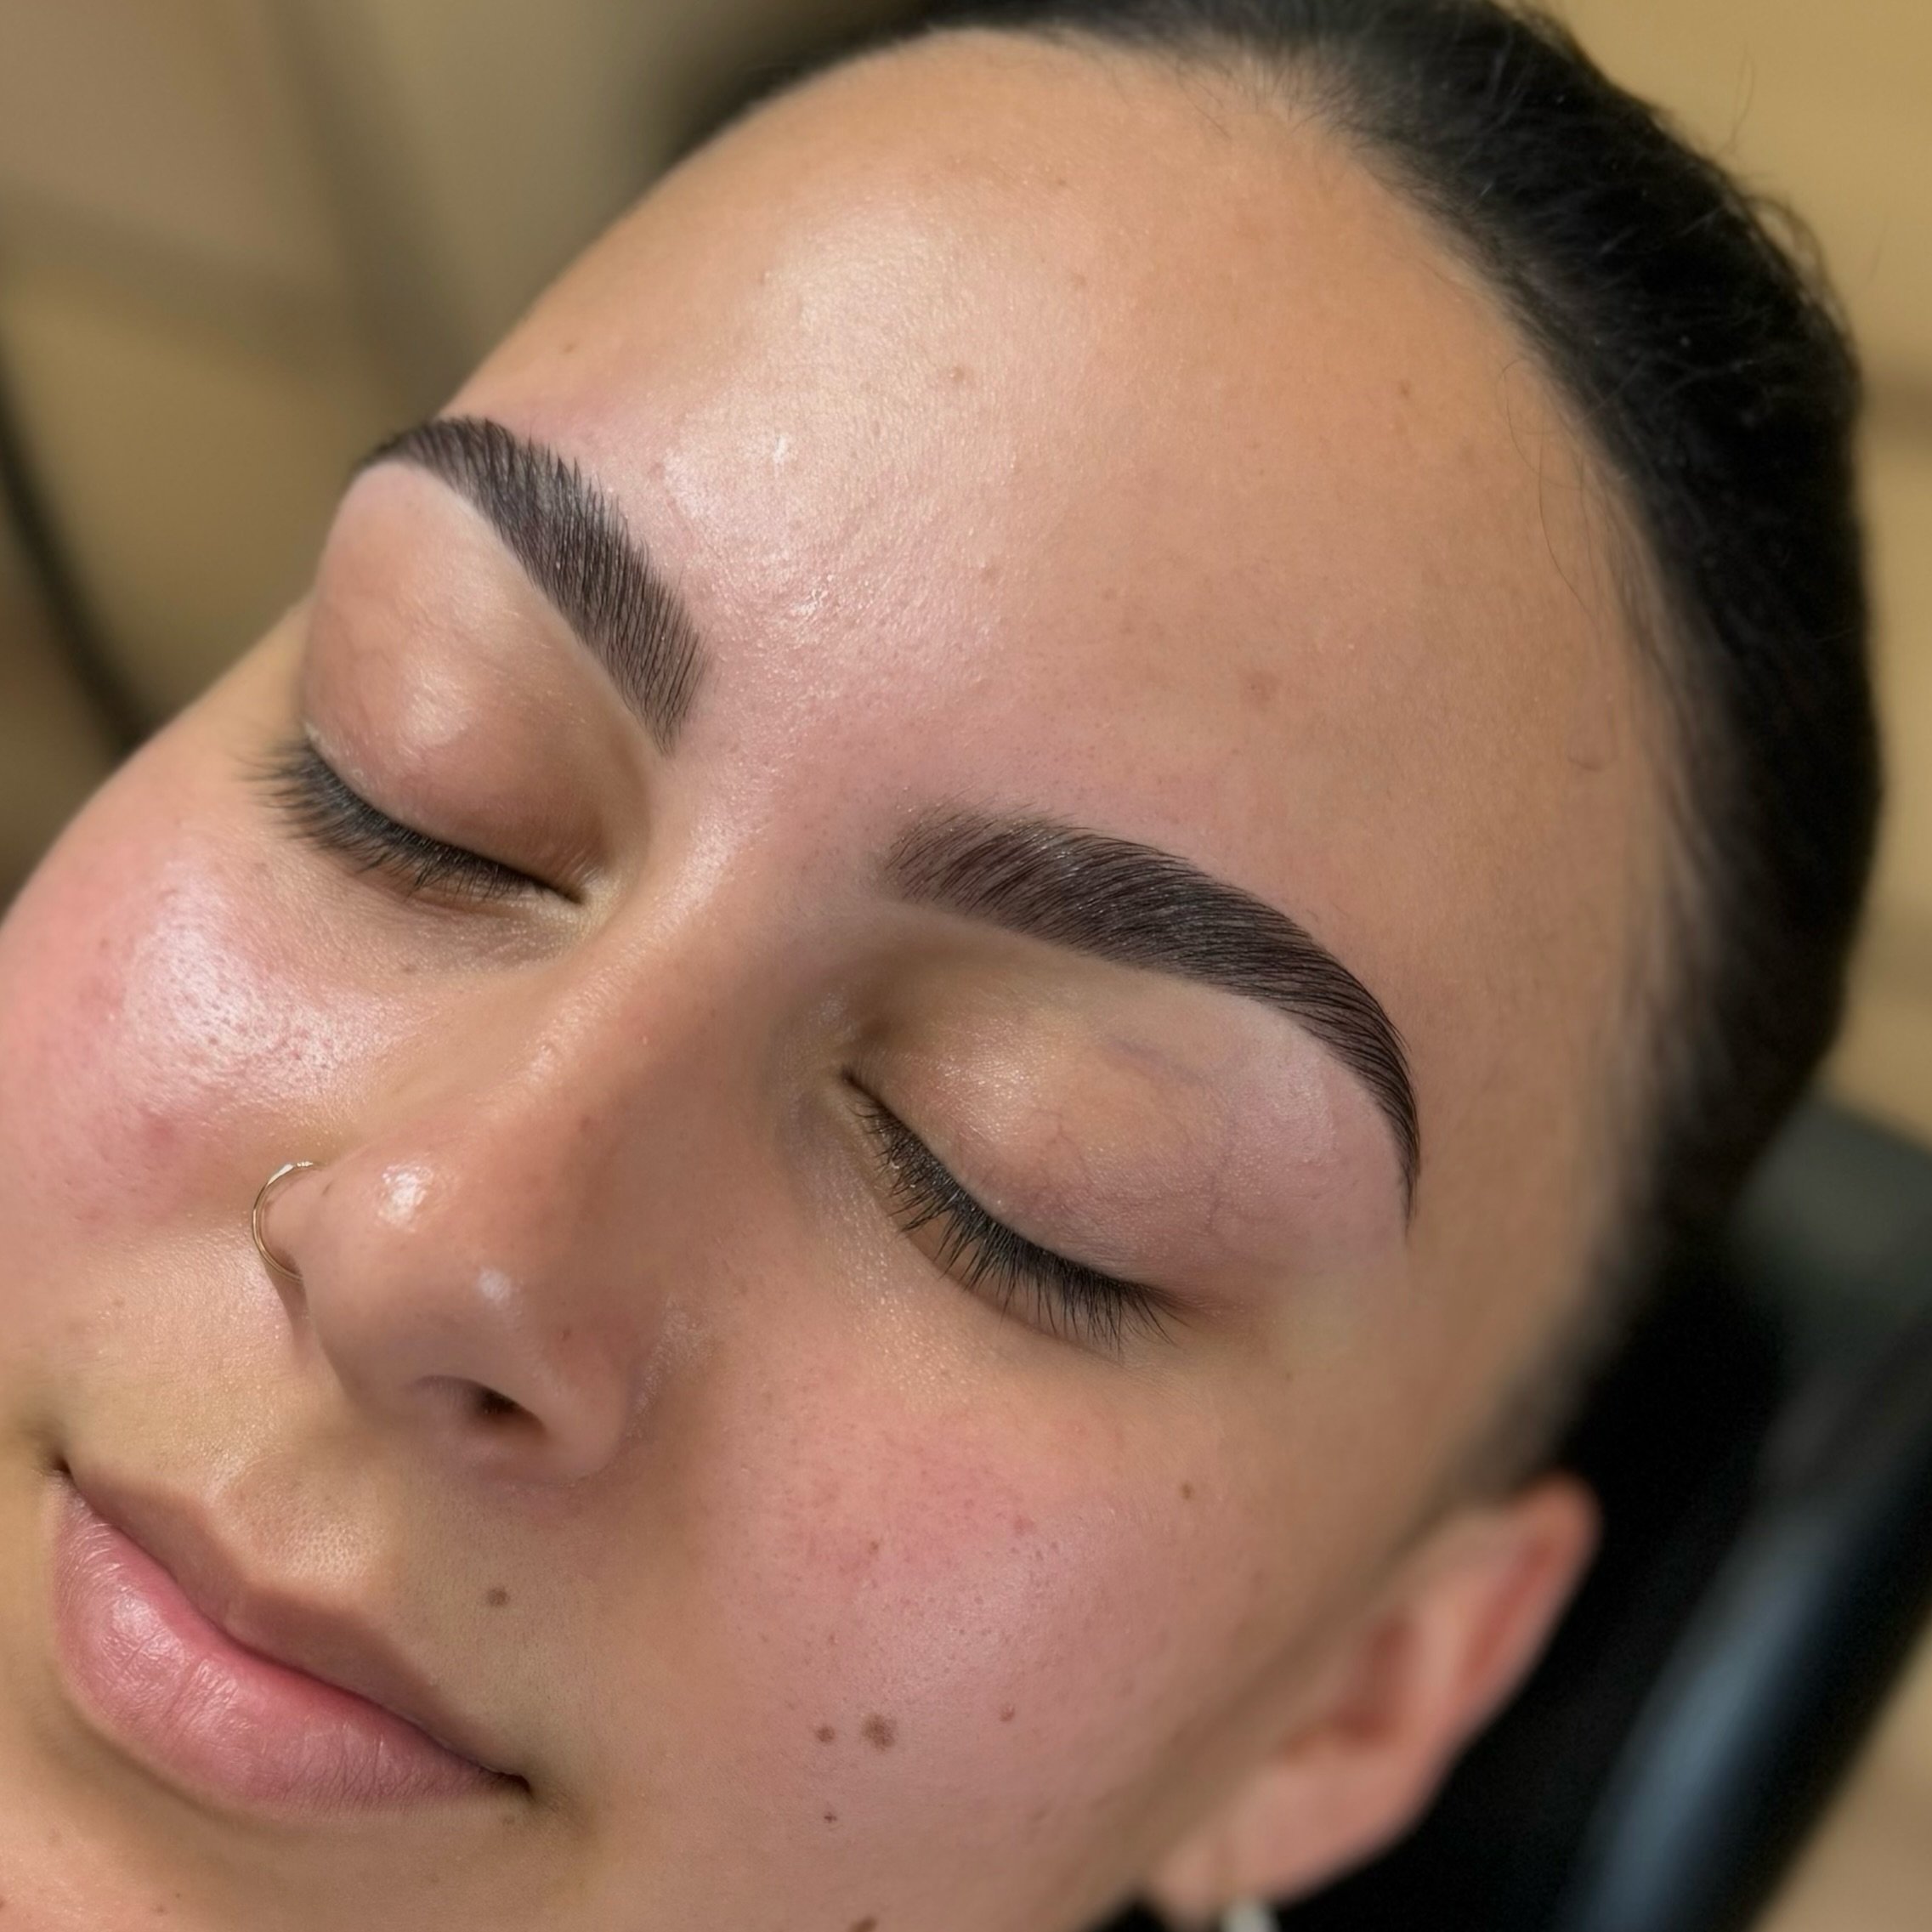 Sculpt + tint done by our new brow artist @mariana.blissologie 👏🏼 Used our favorite brow styling wax by @wtfbeauty.co to create a temporary brow lamination look ✨